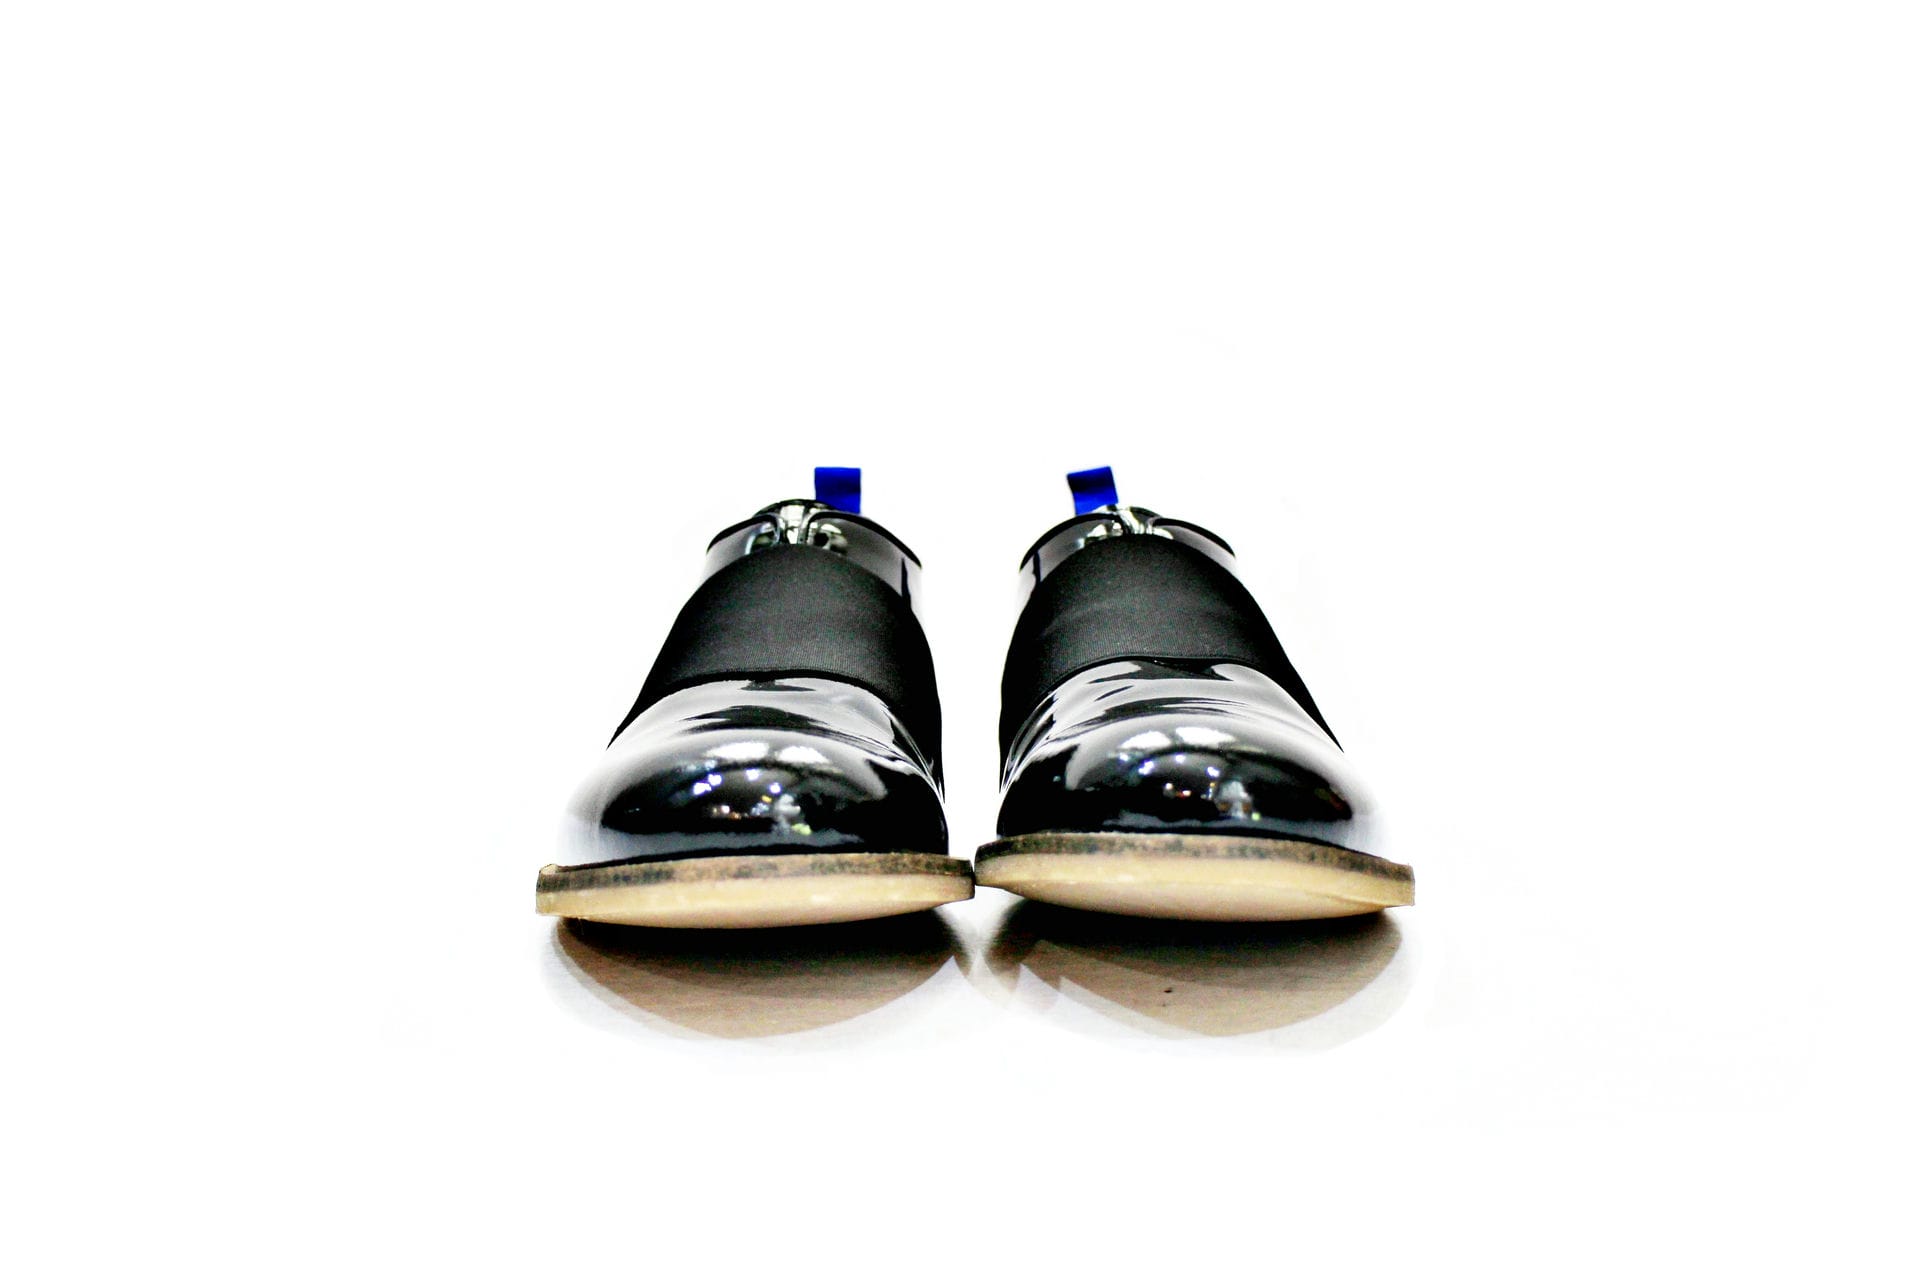 Shoe consisting of varnish, elastic, with all leather lining, leather sole with rubber trail.